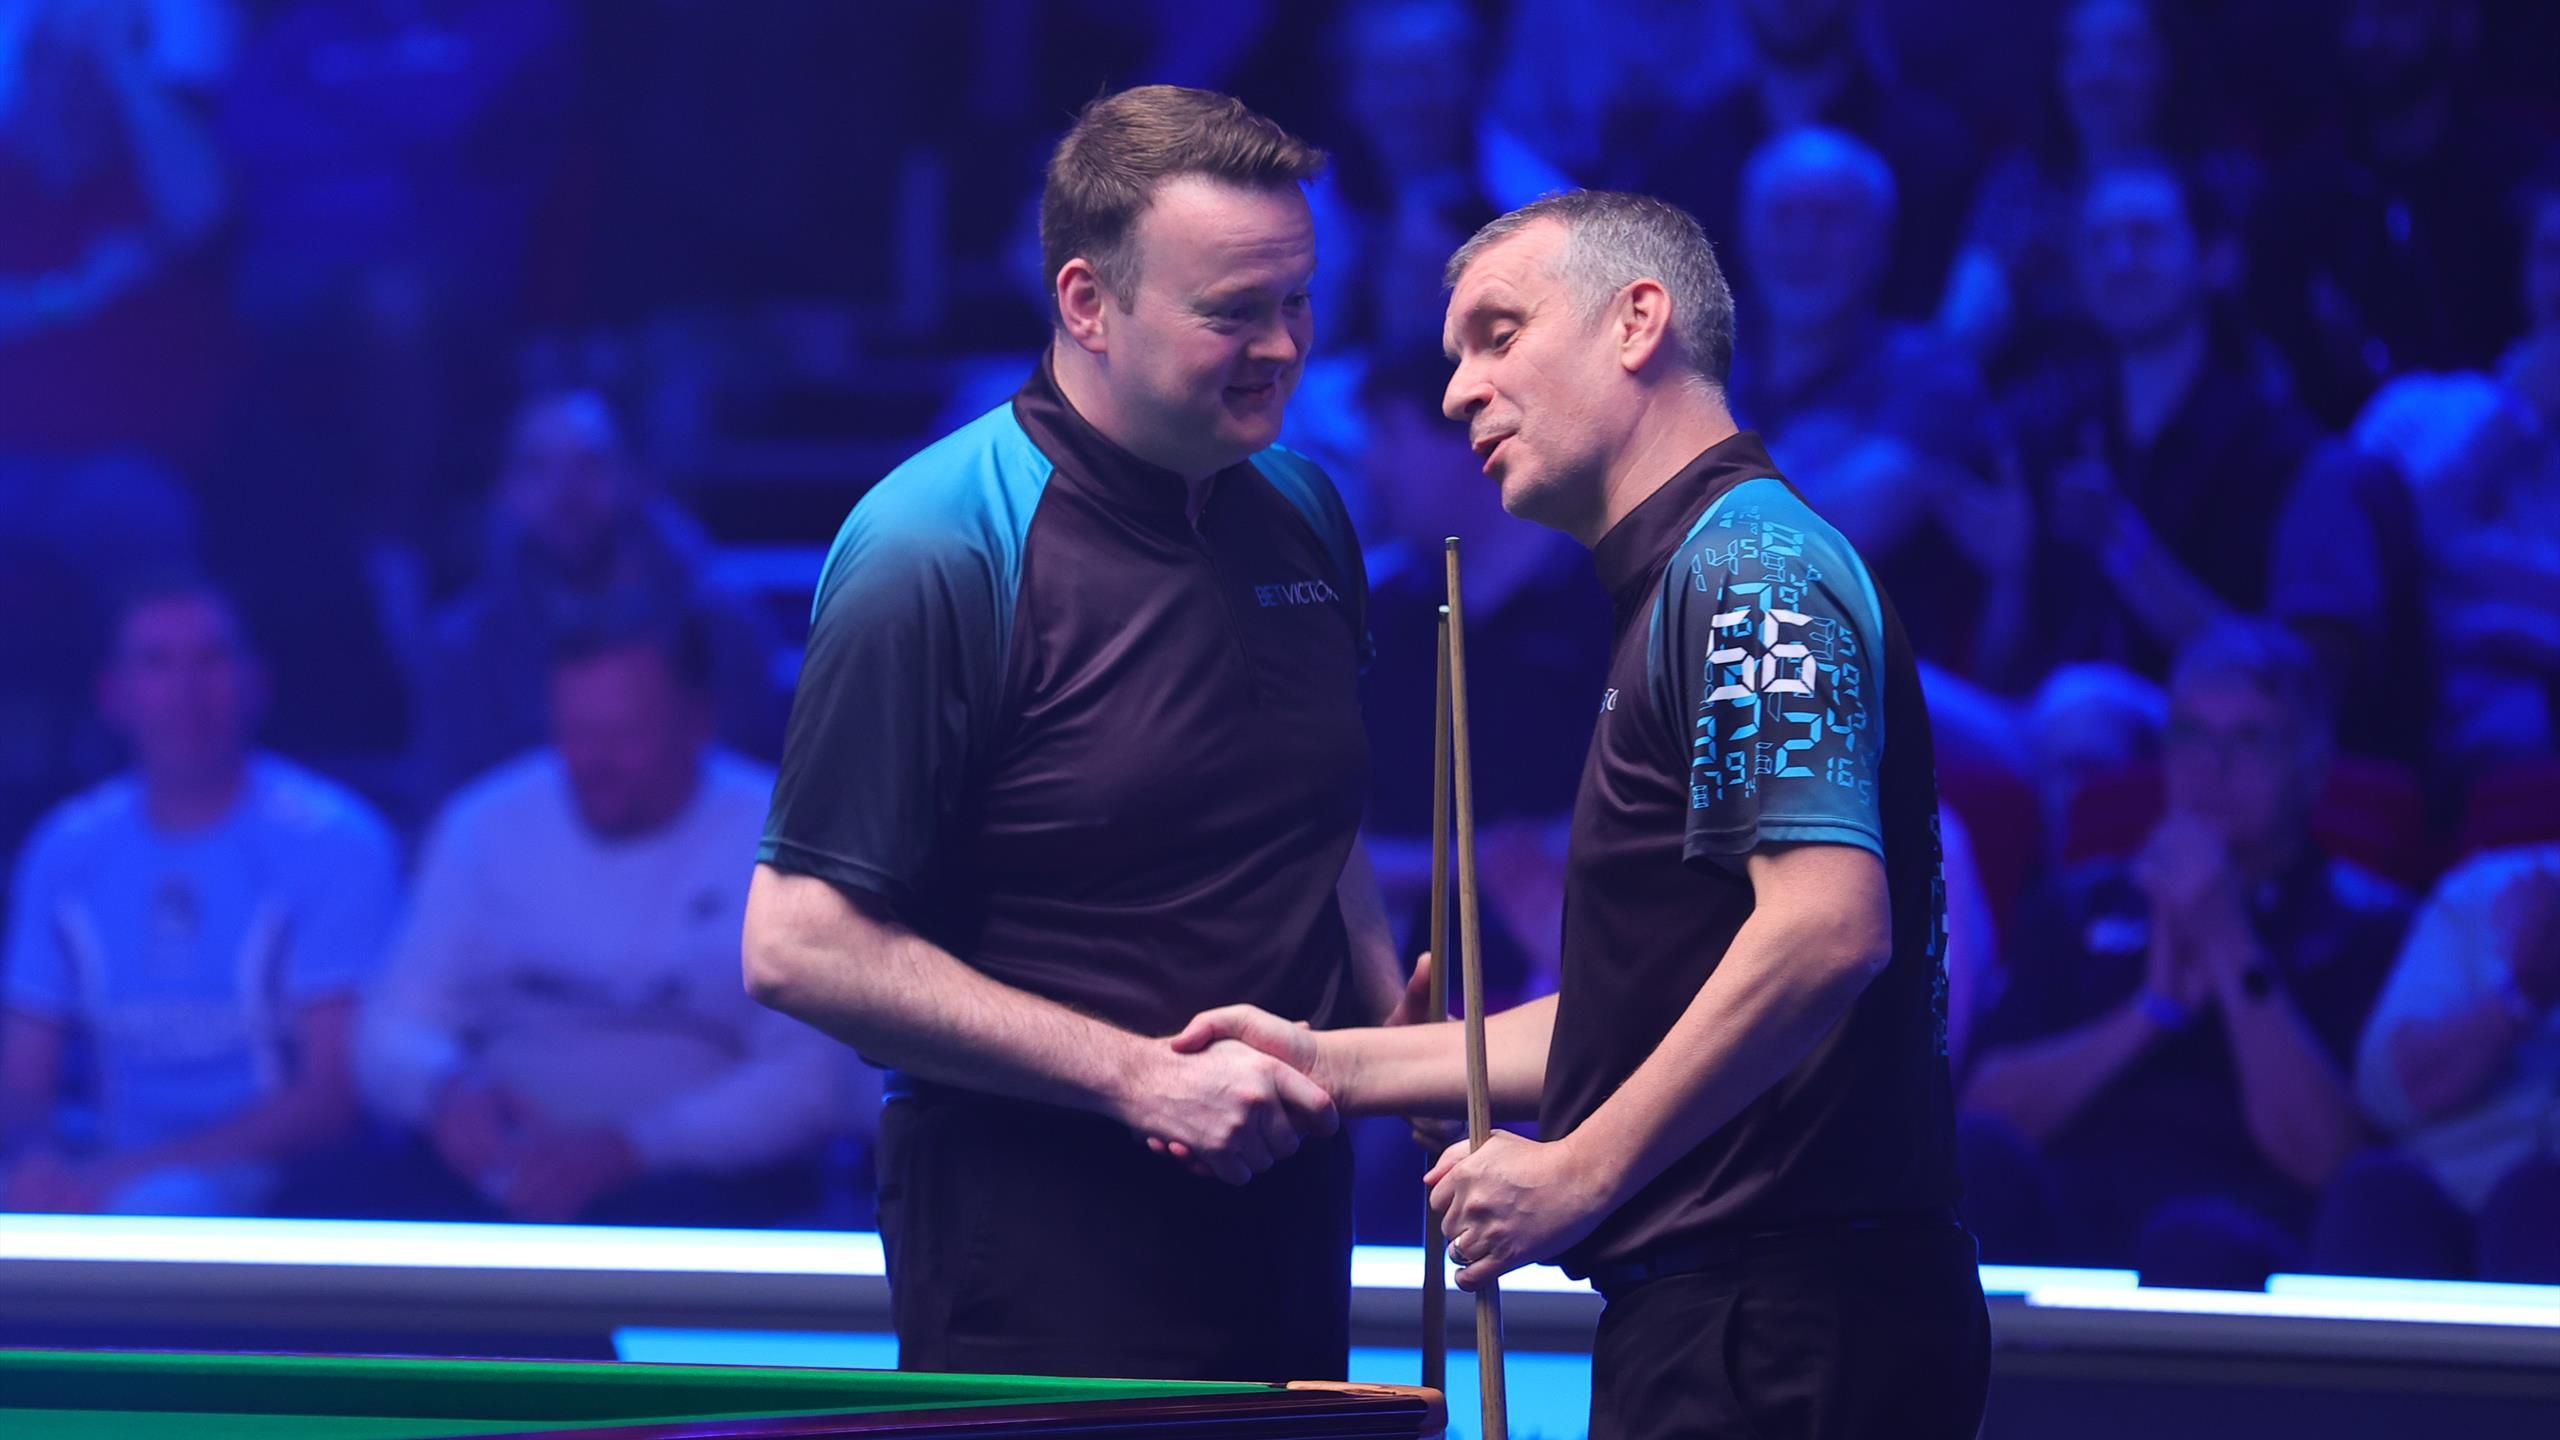 Snooker Shoot Out Shaun Murphy eliminated by Mark Davis, Dominic Dale beats Ken Doherty in second round